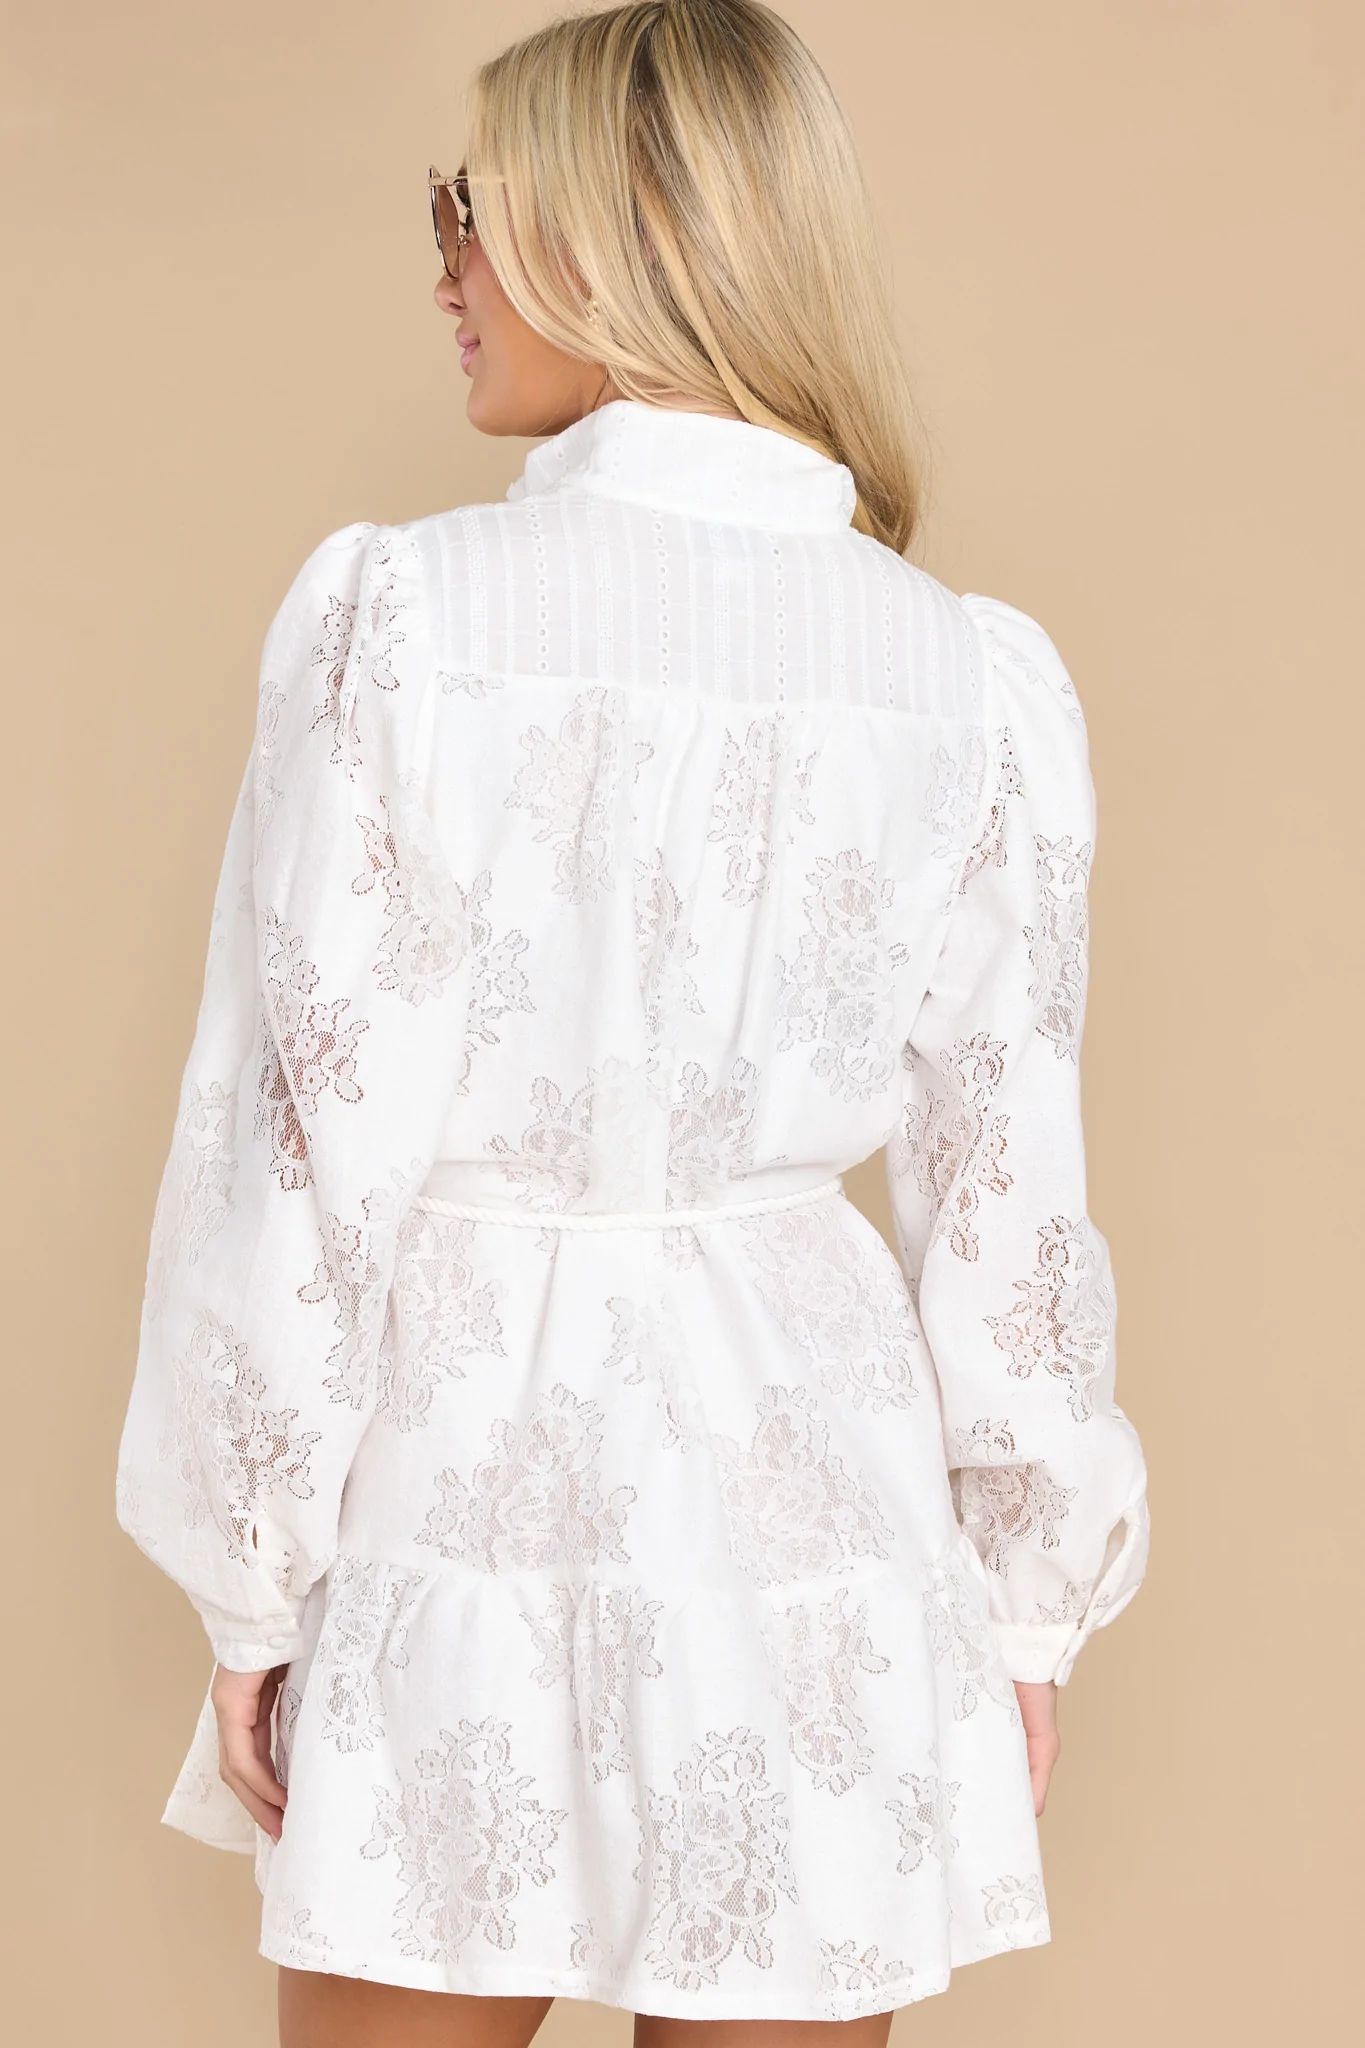 Chase The Moon Ivory Lace Dress | Red Dress 